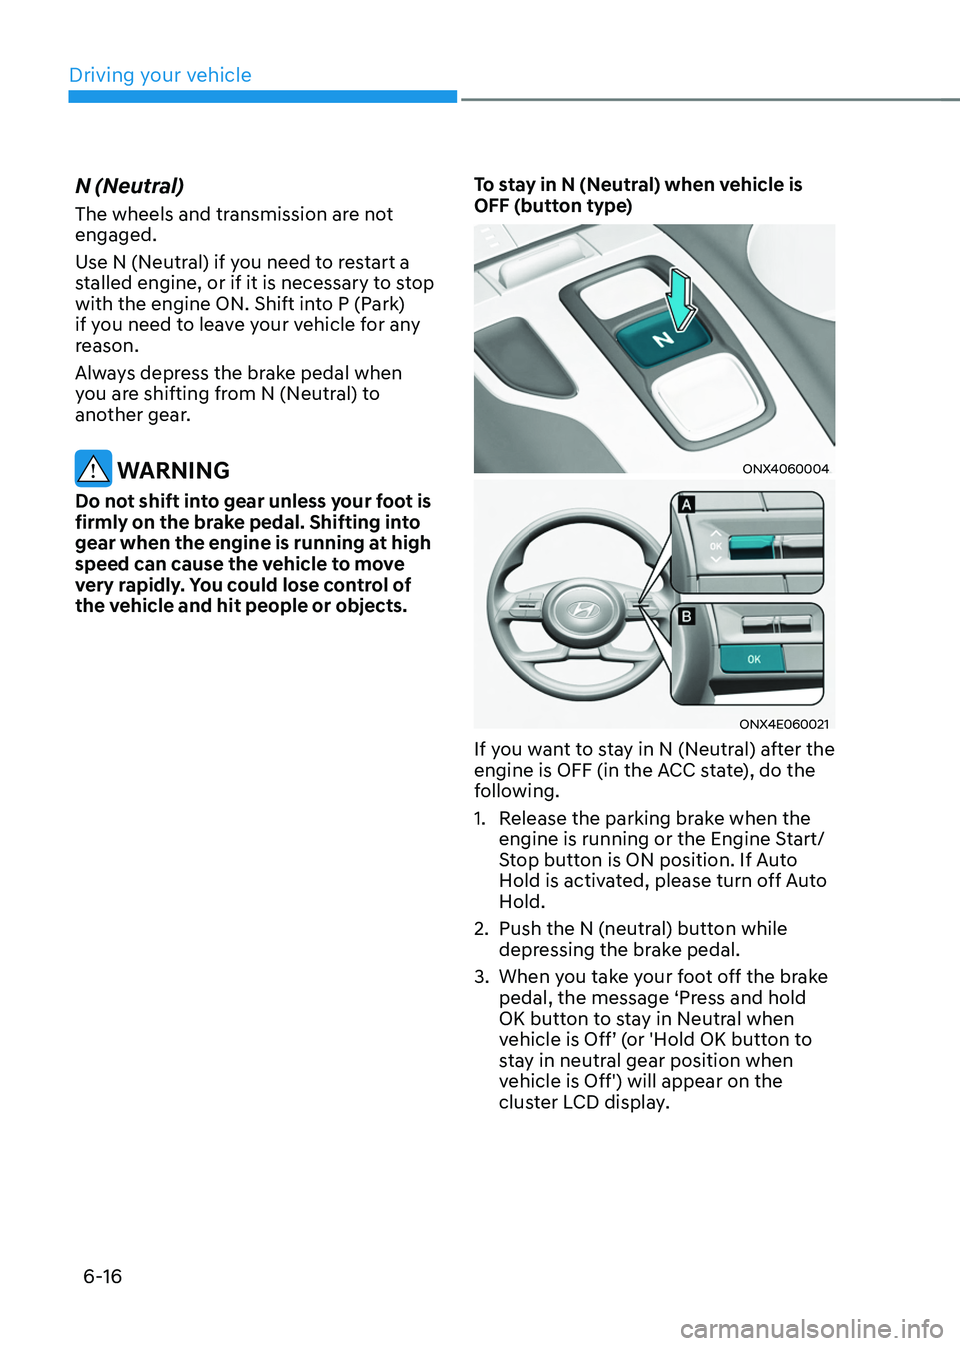 HYUNDAI TUCSON 2022  Owners Manual Driving your vehicle
6-16
N (Neutral)
The wheels and transmission are not 
engaged.
Use N (Neutral) if you need to restart a 
stalled engine, or if it is necessary to stop 
with the engine ON. Shift i